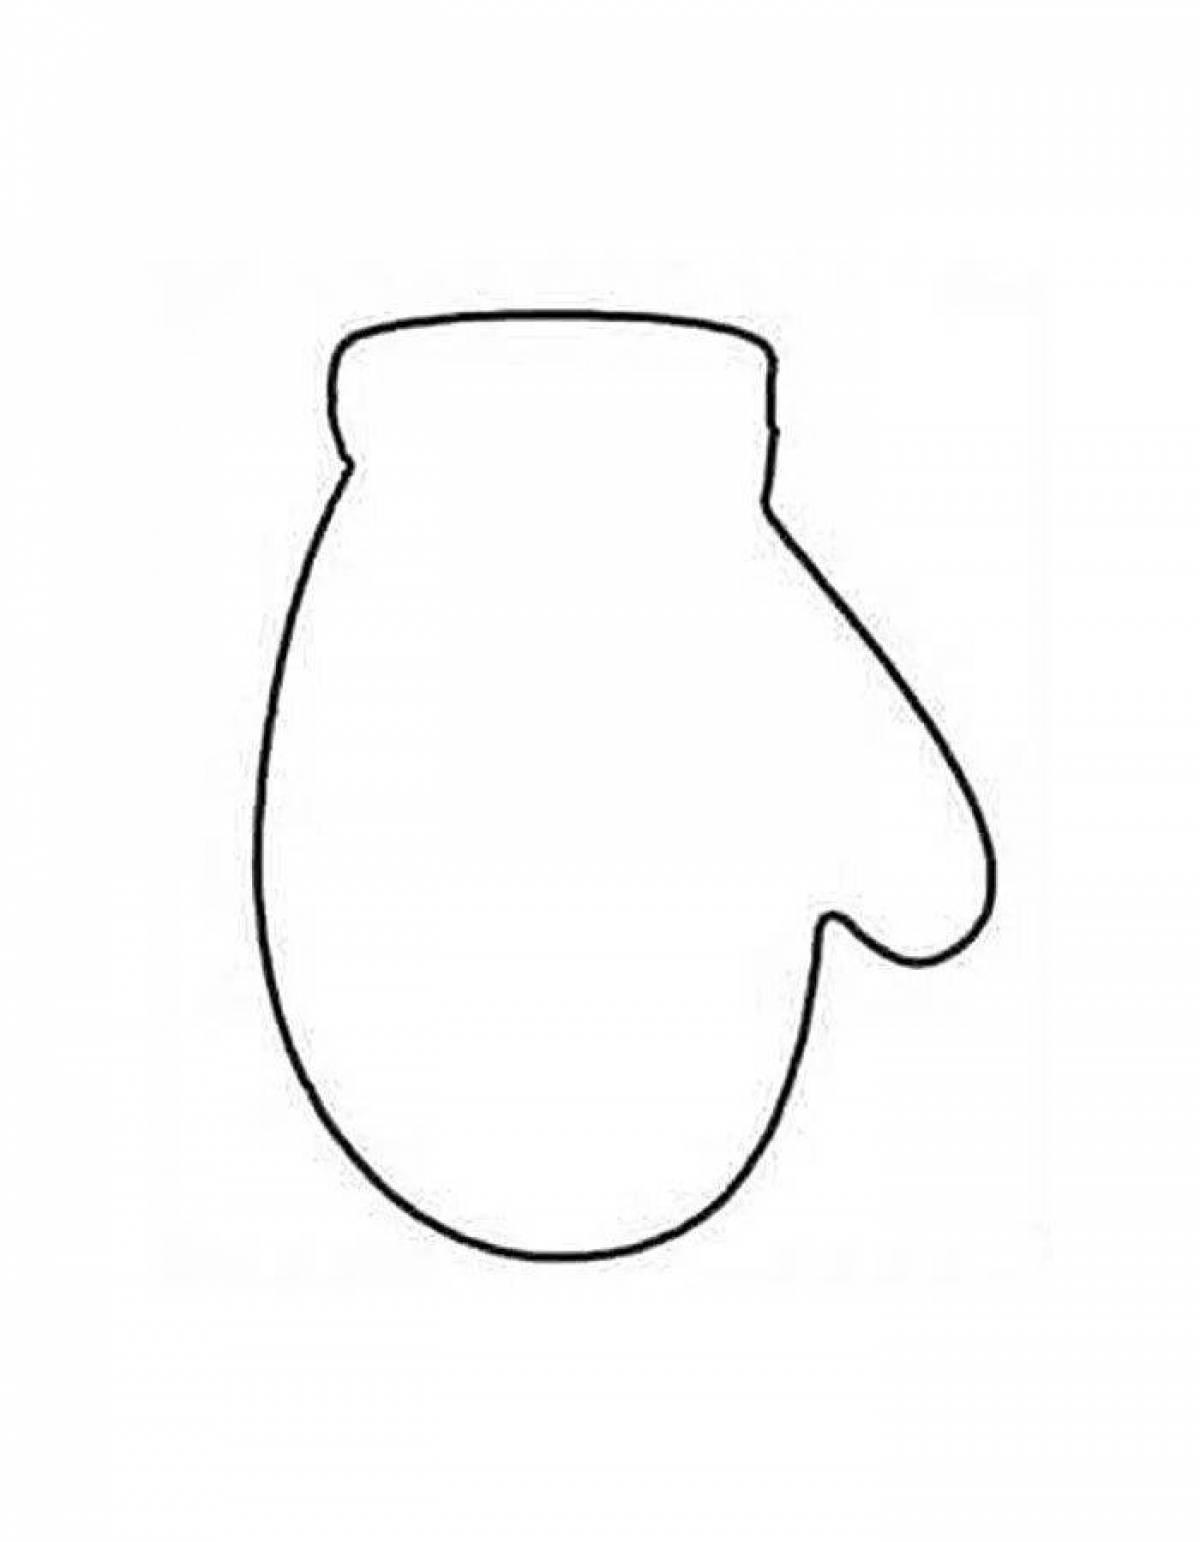 Coloring page charming mitten